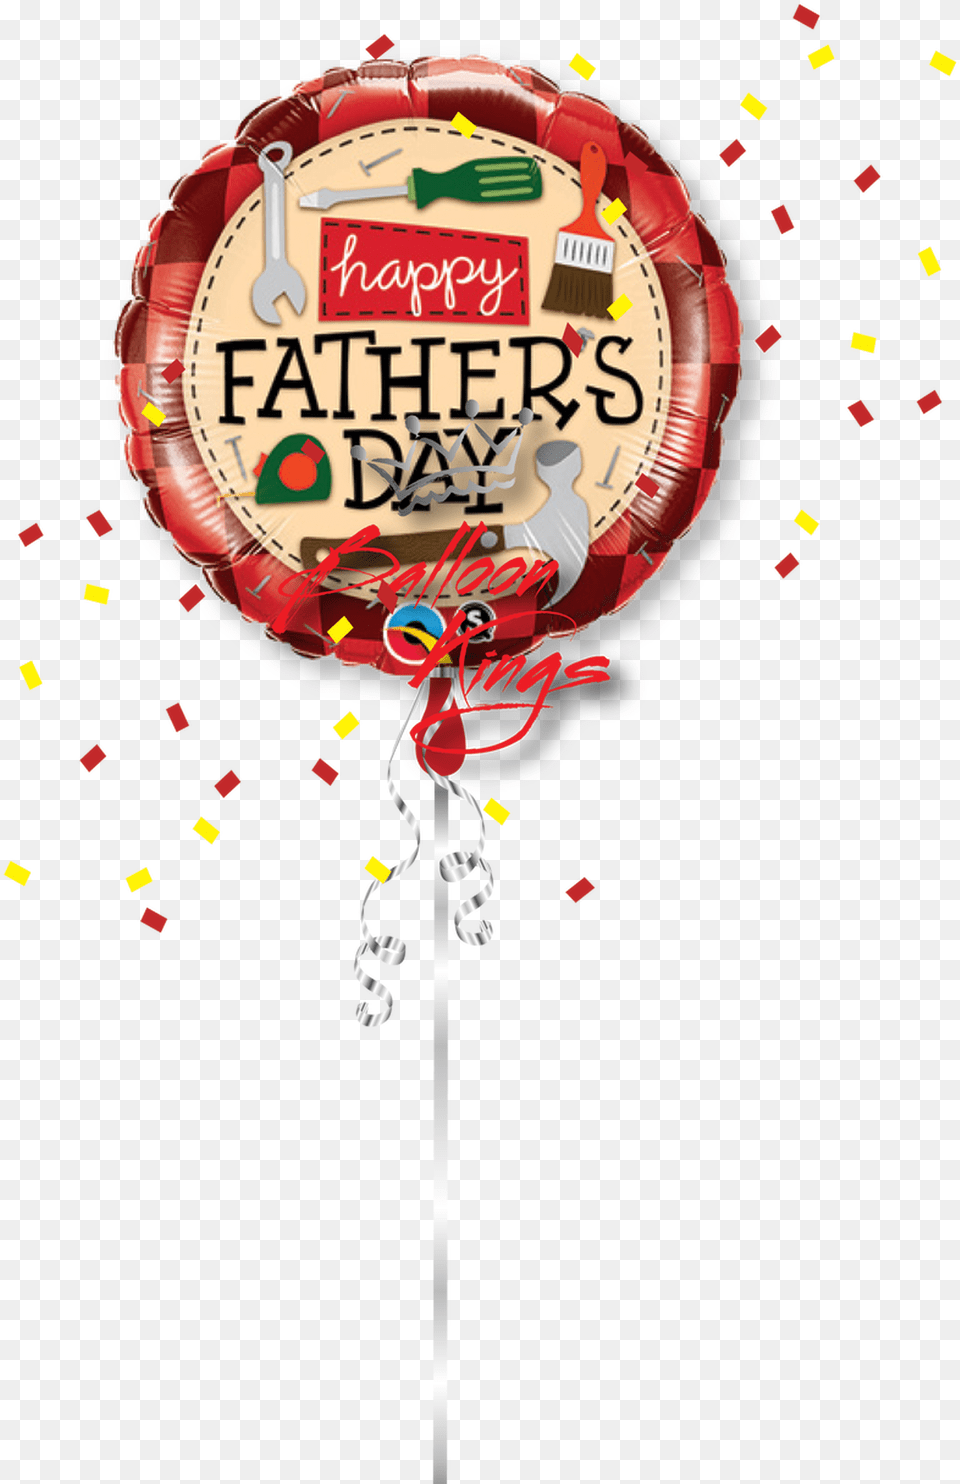 Happy Fathers Day Tools Father39s Day Balloons, Candy, Food, Sweets, Balloon Free Transparent Png